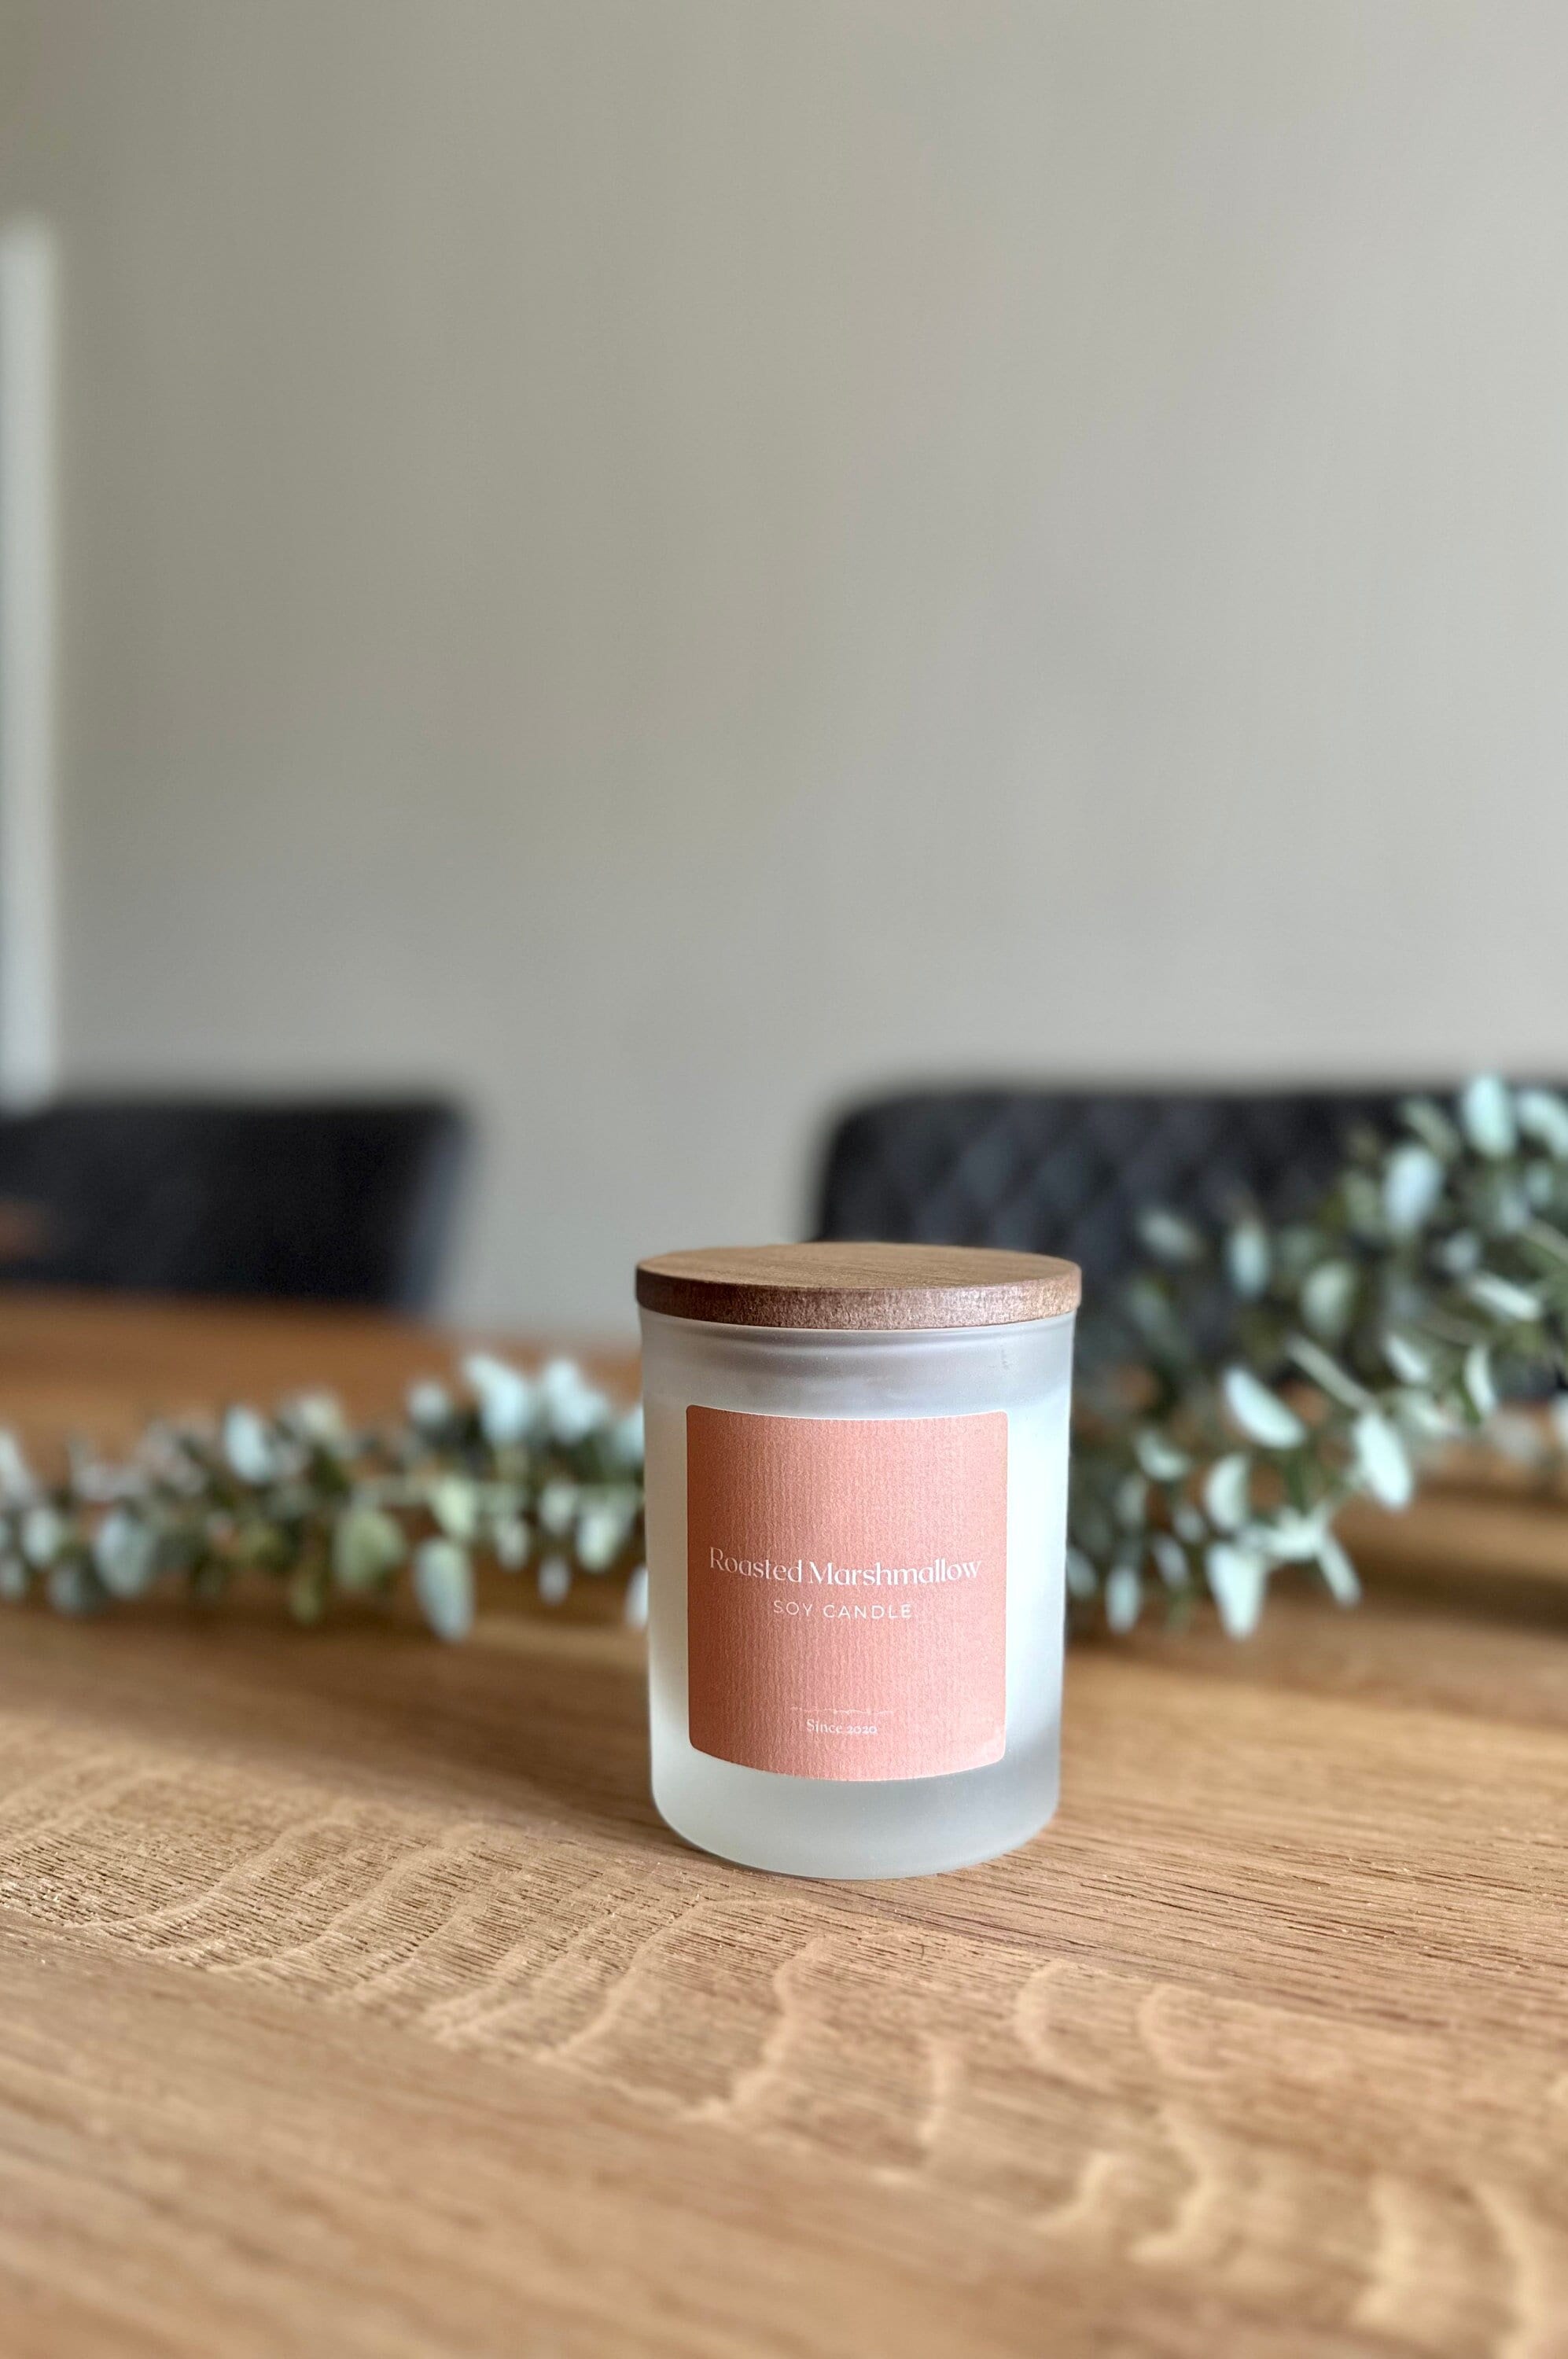 15 All Natural Organic and Non-Toxic Candles - Going Zero Waste